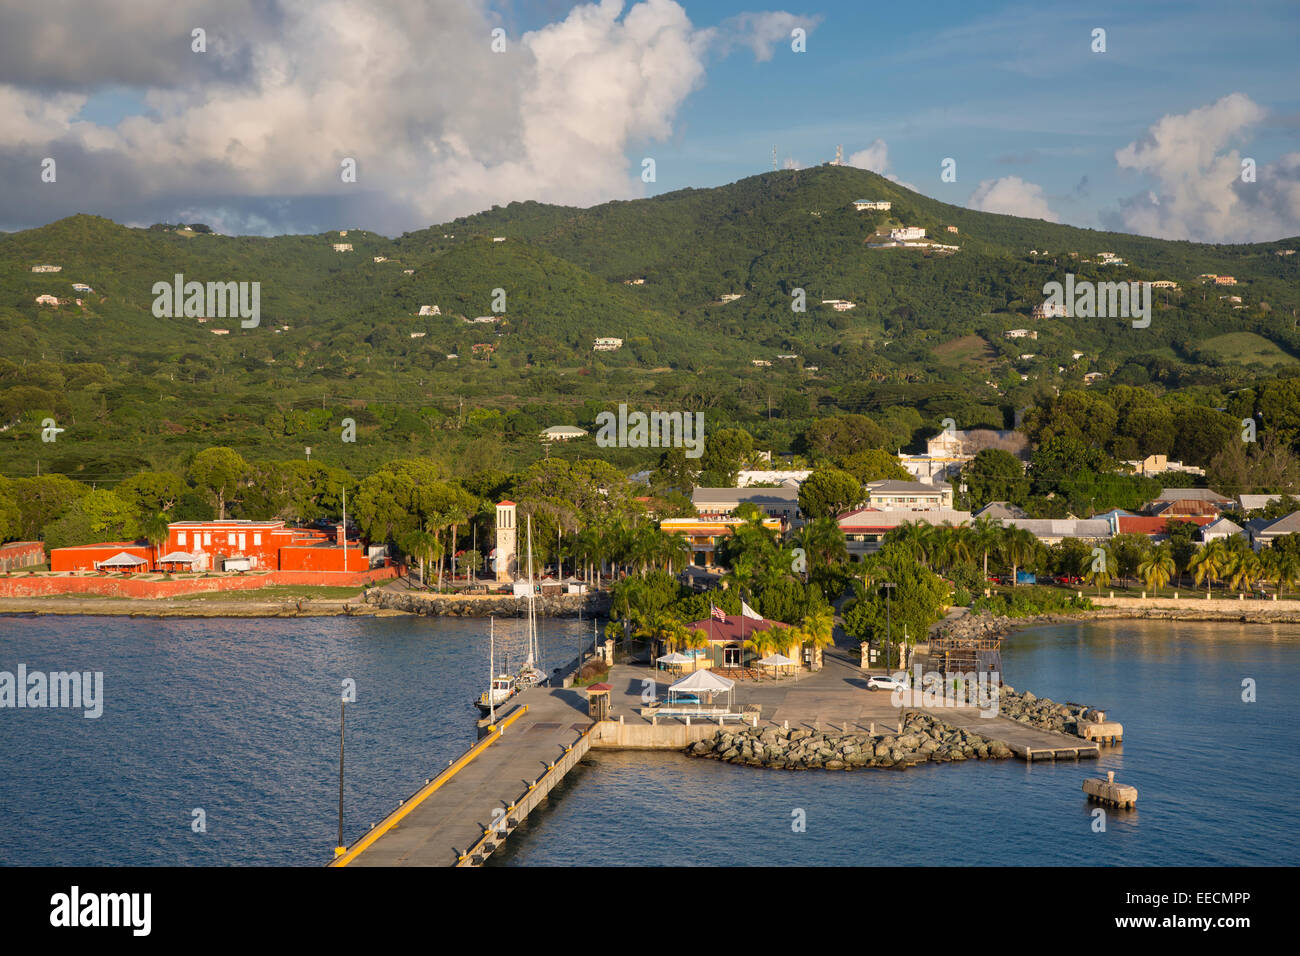 Dock and port area in Frederiksted, Saint Croix, US Virgin Islands Stock Photo